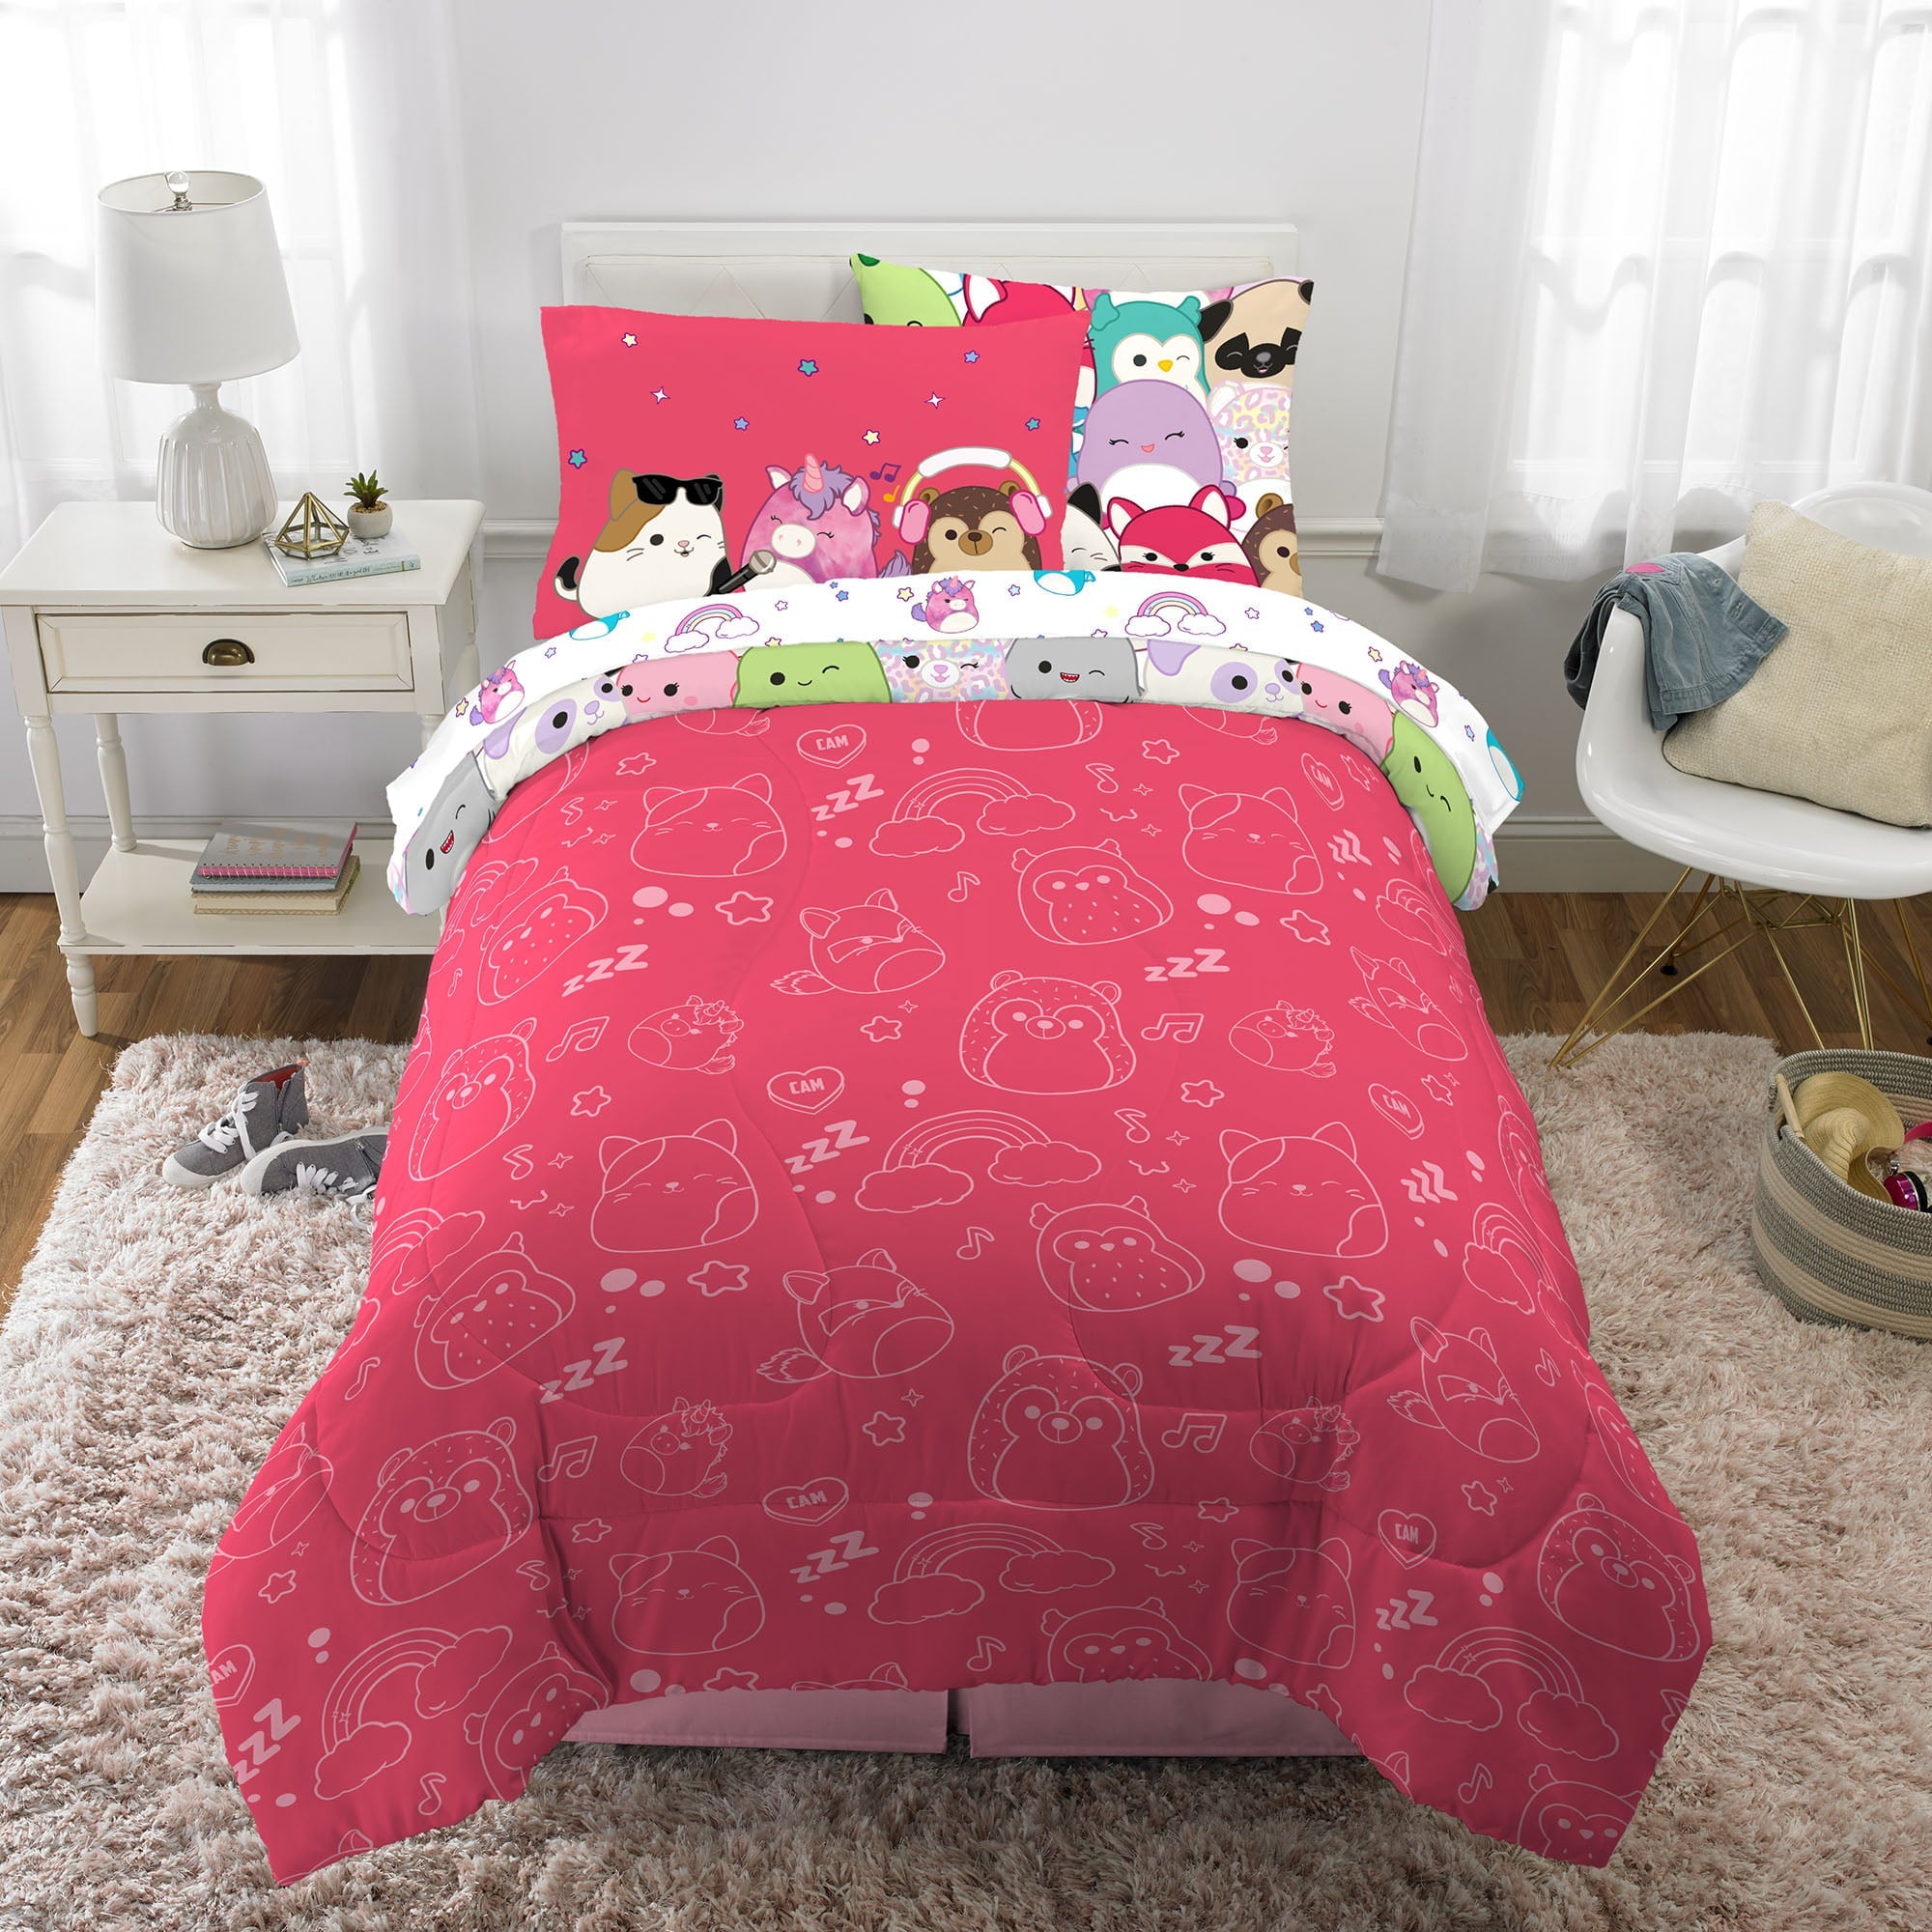 Squishmallows Kids Twin Bed in a Bag, Comforter and Sheets, Multicolor